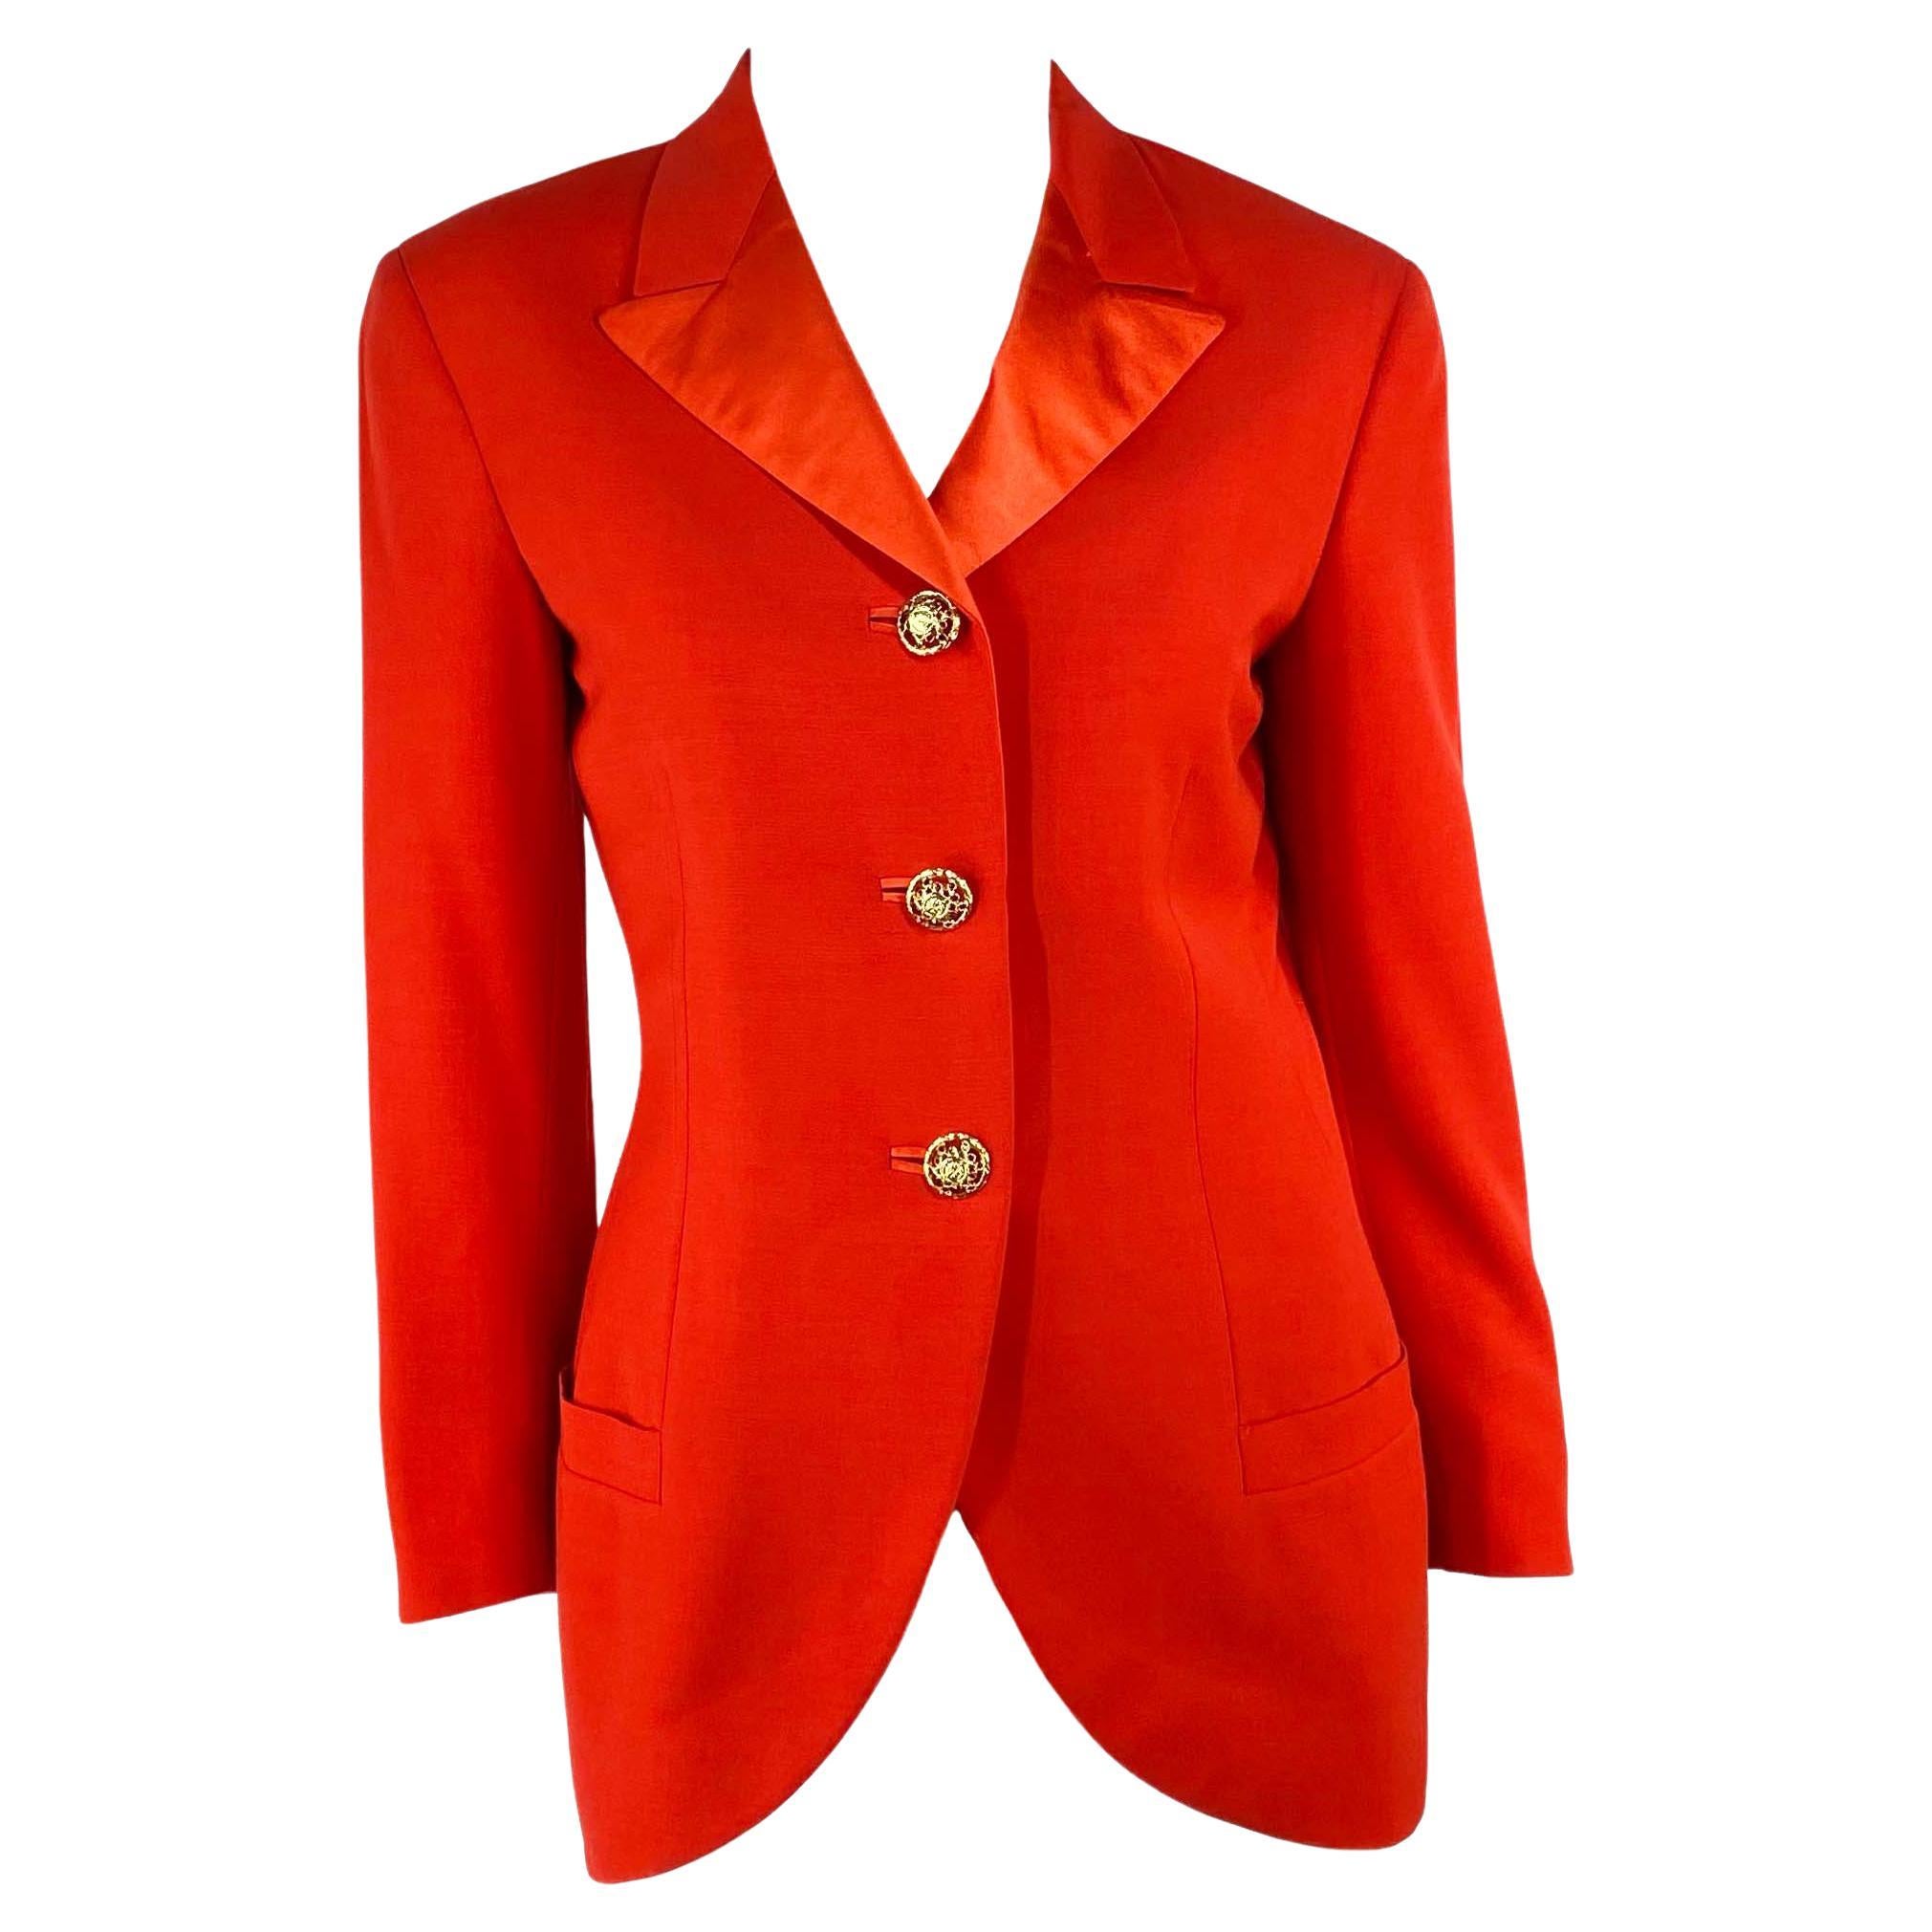 F/W 1992 Gianni Versace Couture Bondage (Miss S&M) Runway Collection Red Blazer  For Sale